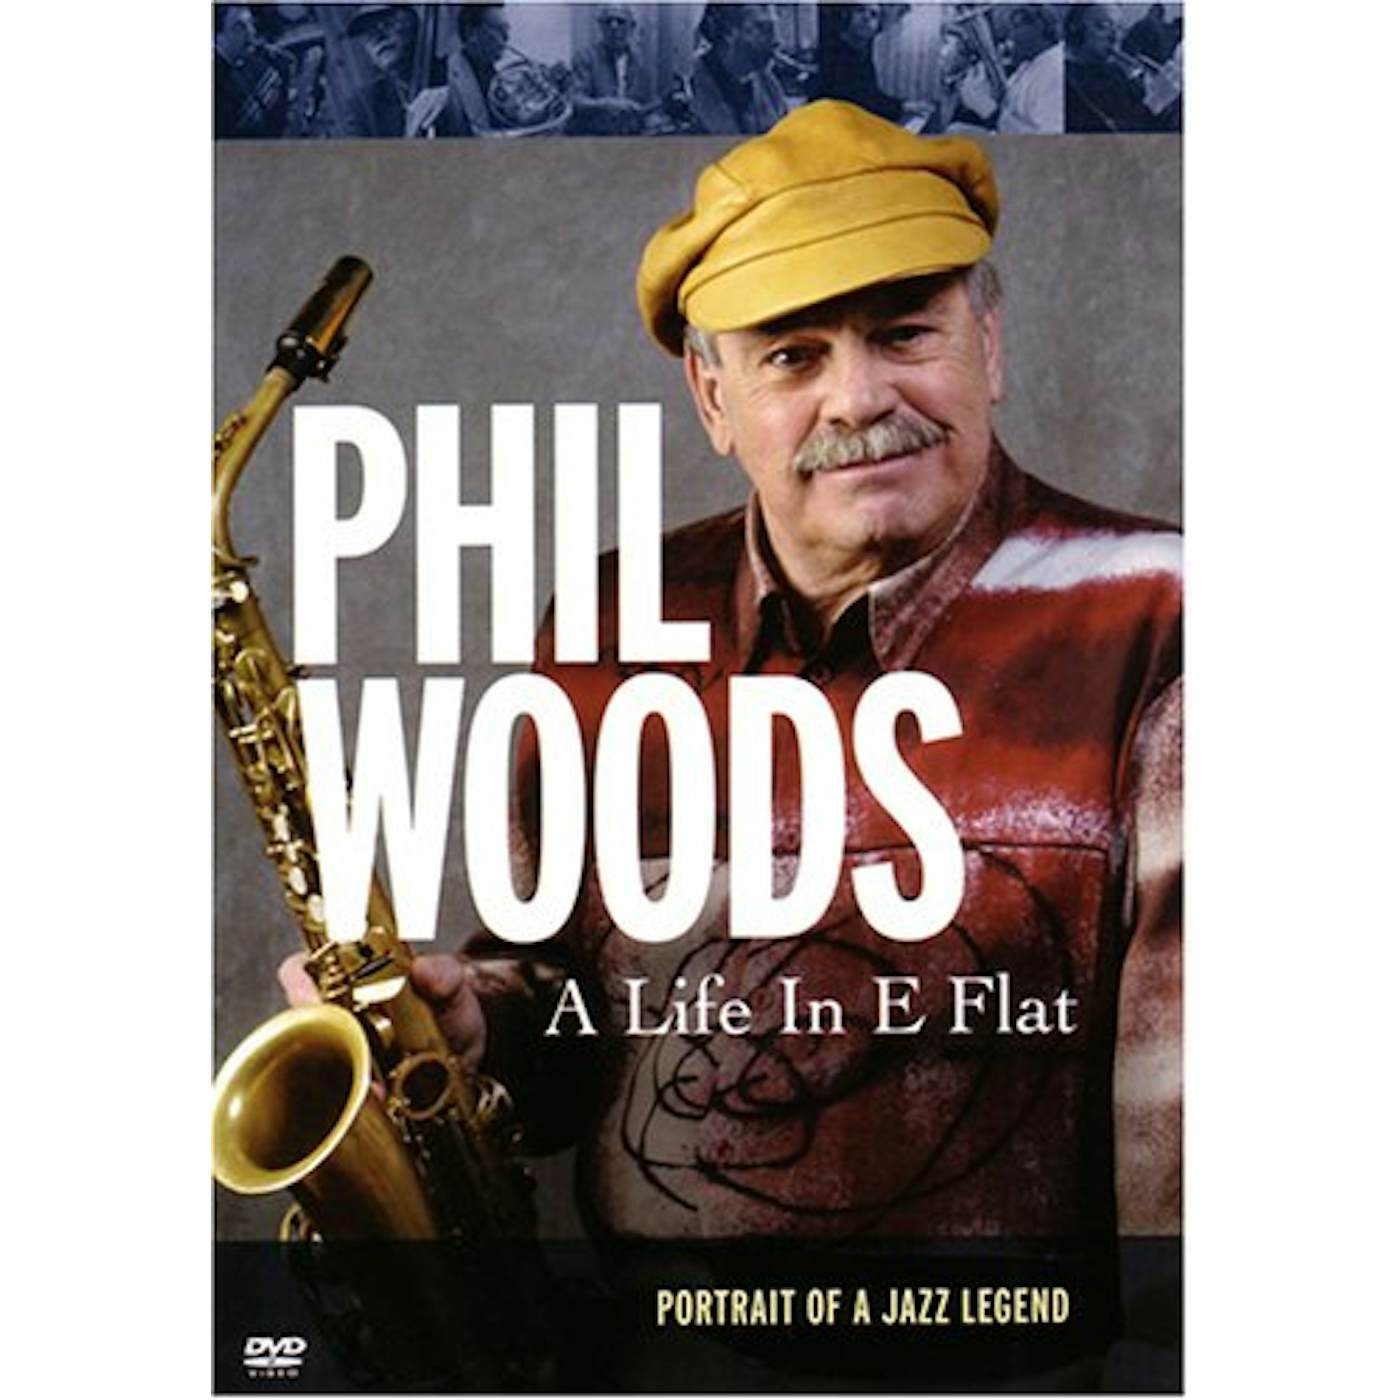 Phil Woods LIFE IN E FLAT DVD